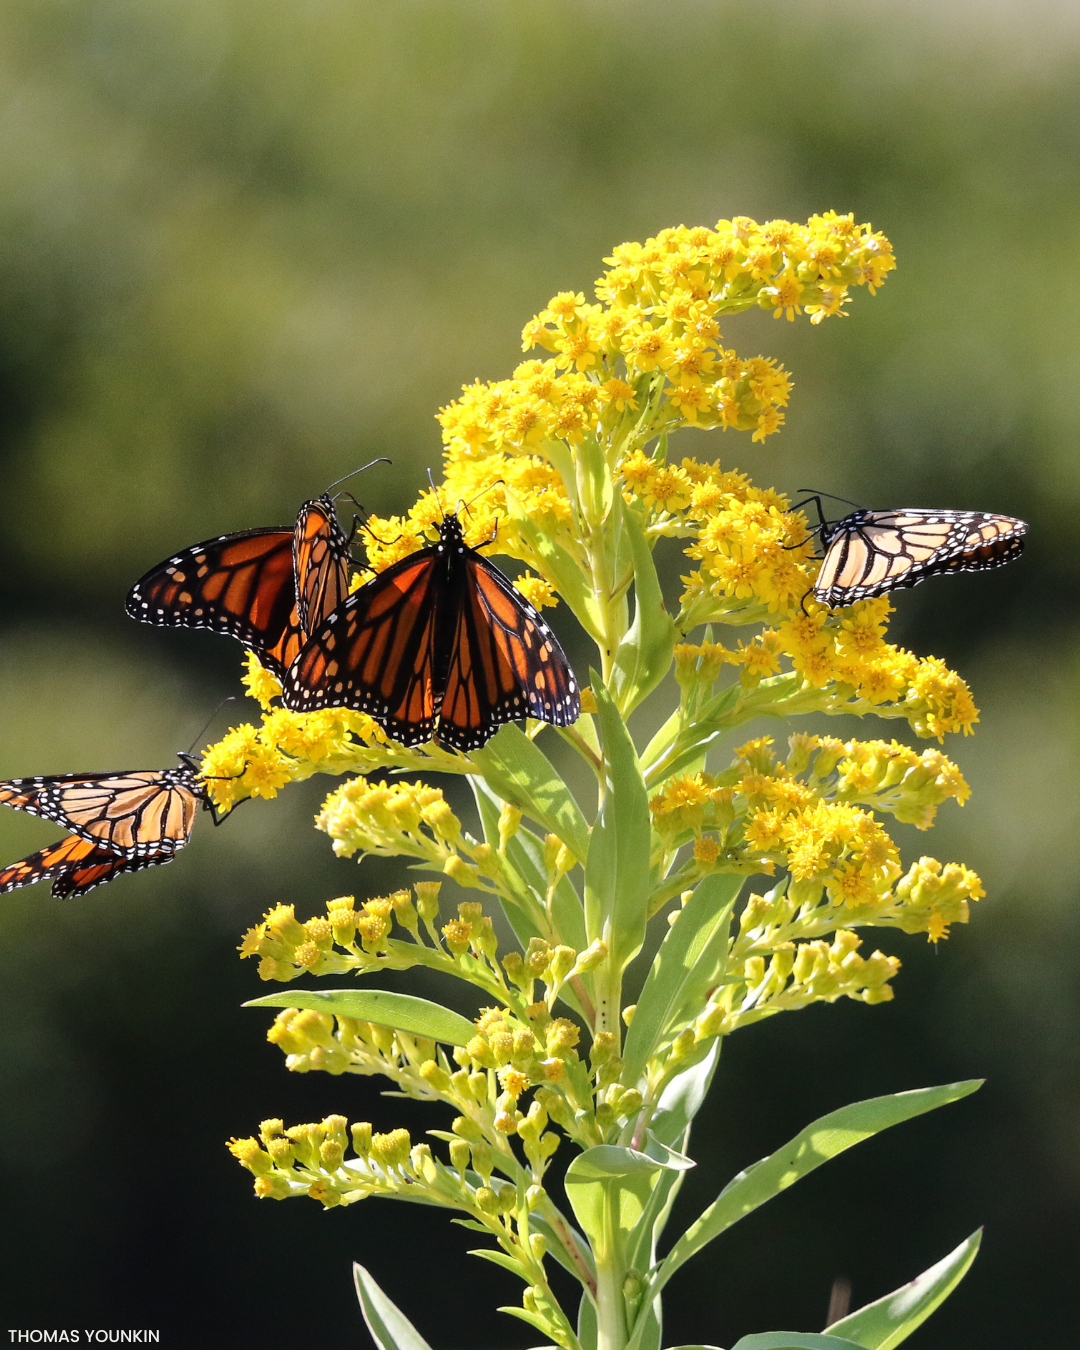 yellow goldenrod plant with monarch butterflies